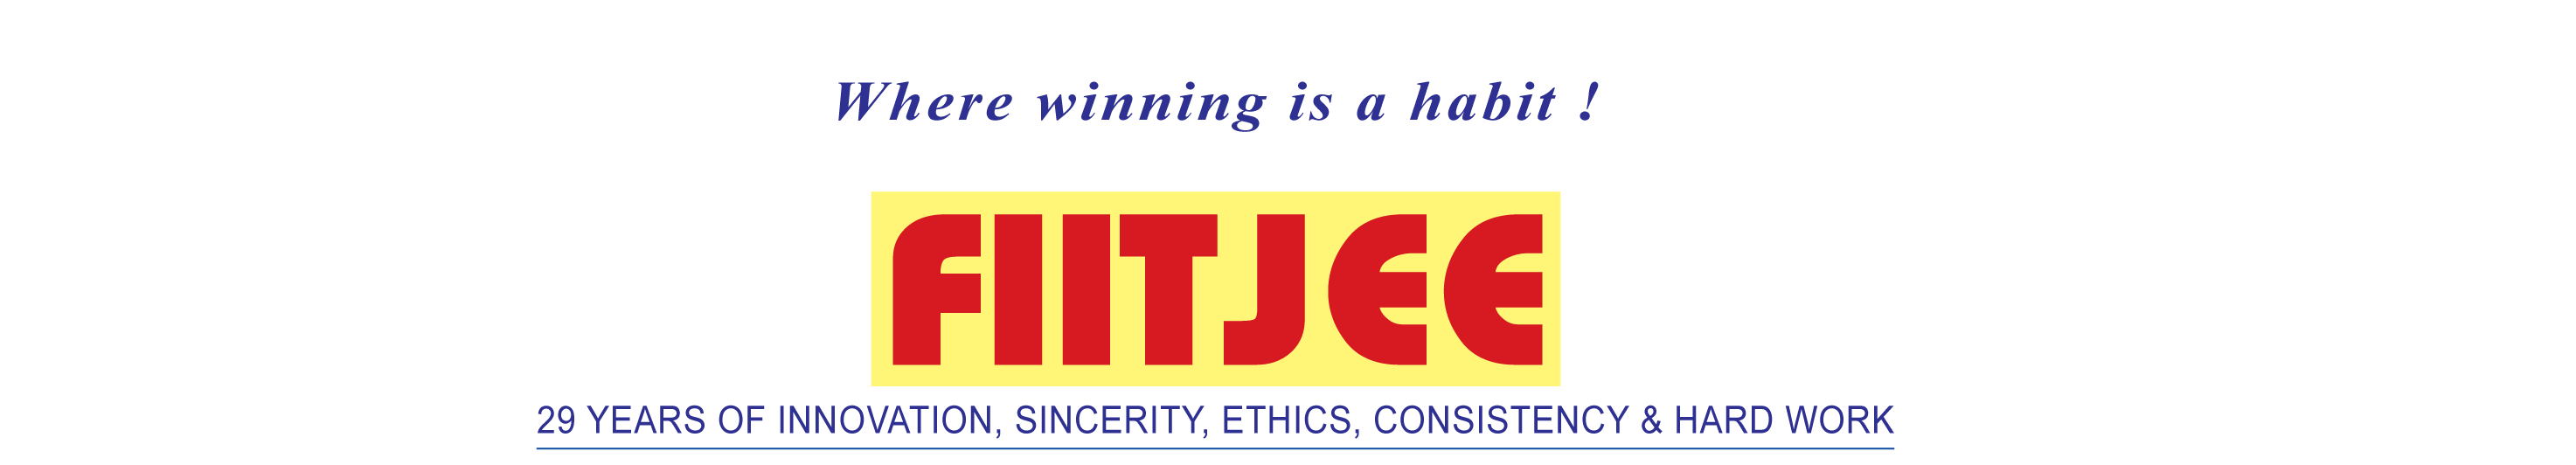 fiitjee: course details, fee structure, reviews, contact details